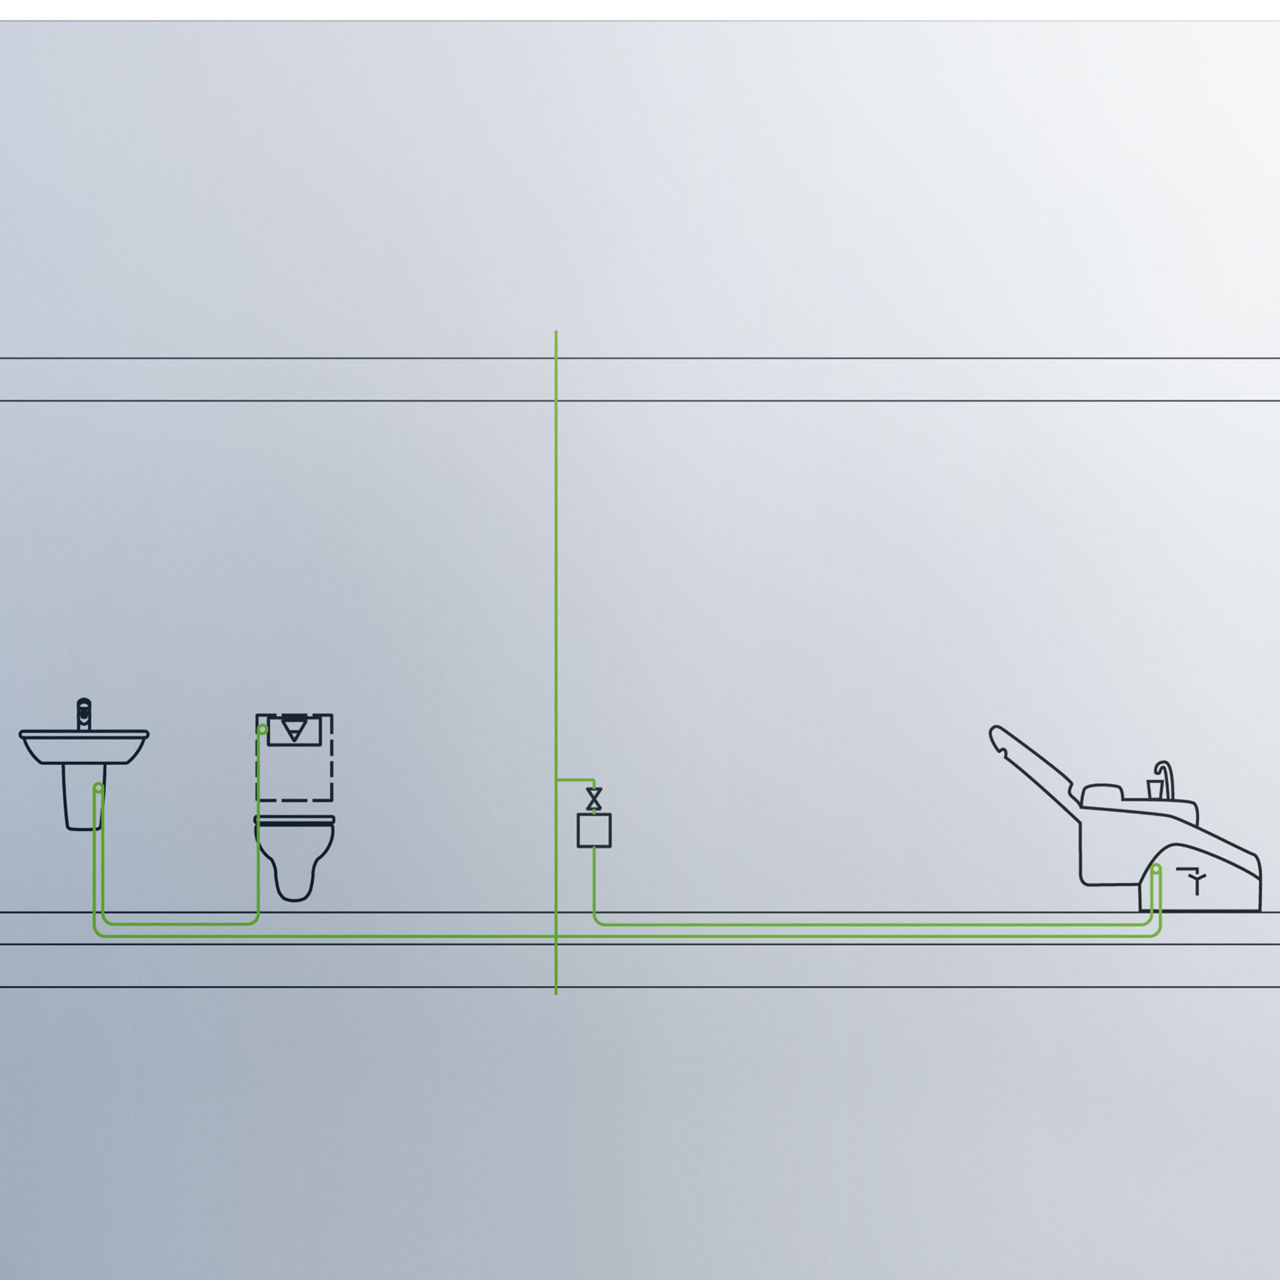 The installation of an actuating panel with Viega Hygiene+ flushing function at the end of every storey pipe system ensures the hygiene of the drinking water permanently. The most frequently used extraction point (the WC), is at the end of the pipe.